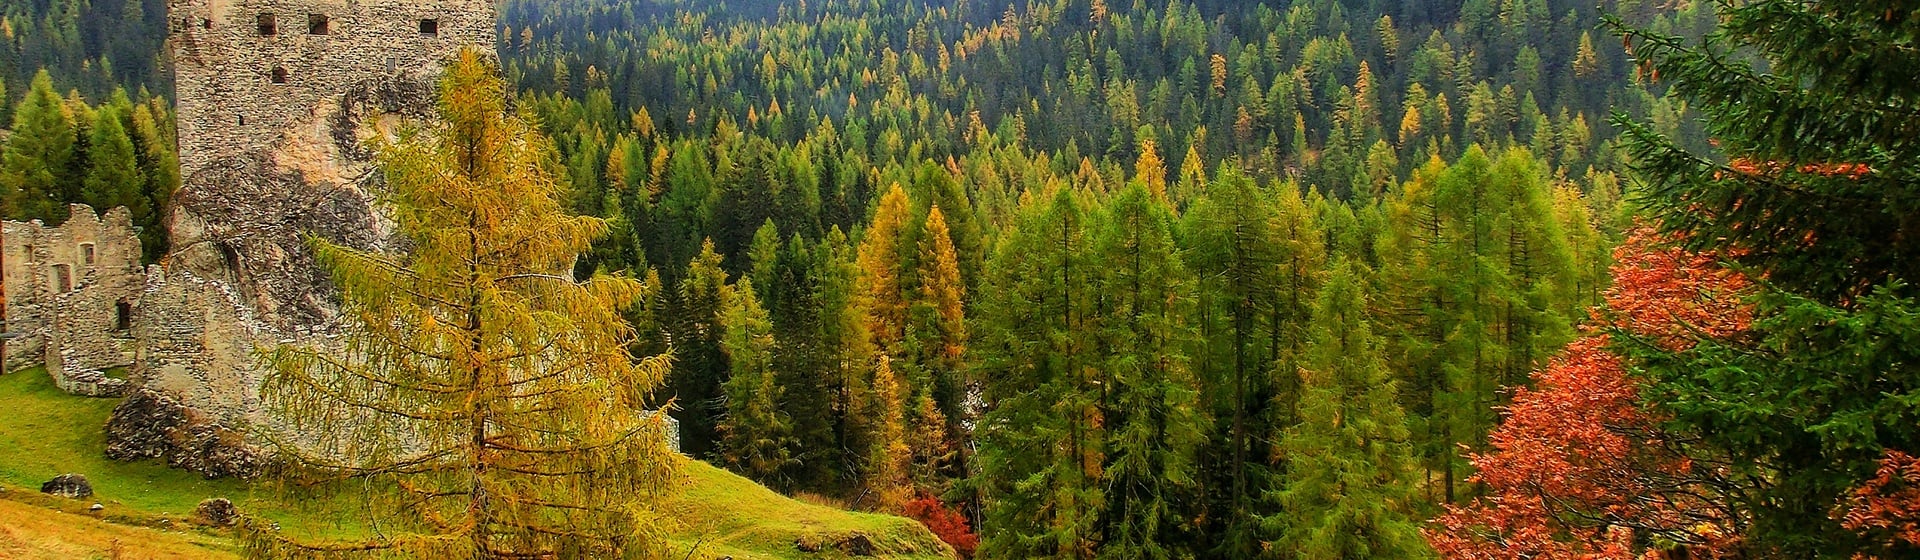 Autumn in Arabba, in the heart of the Dolomites